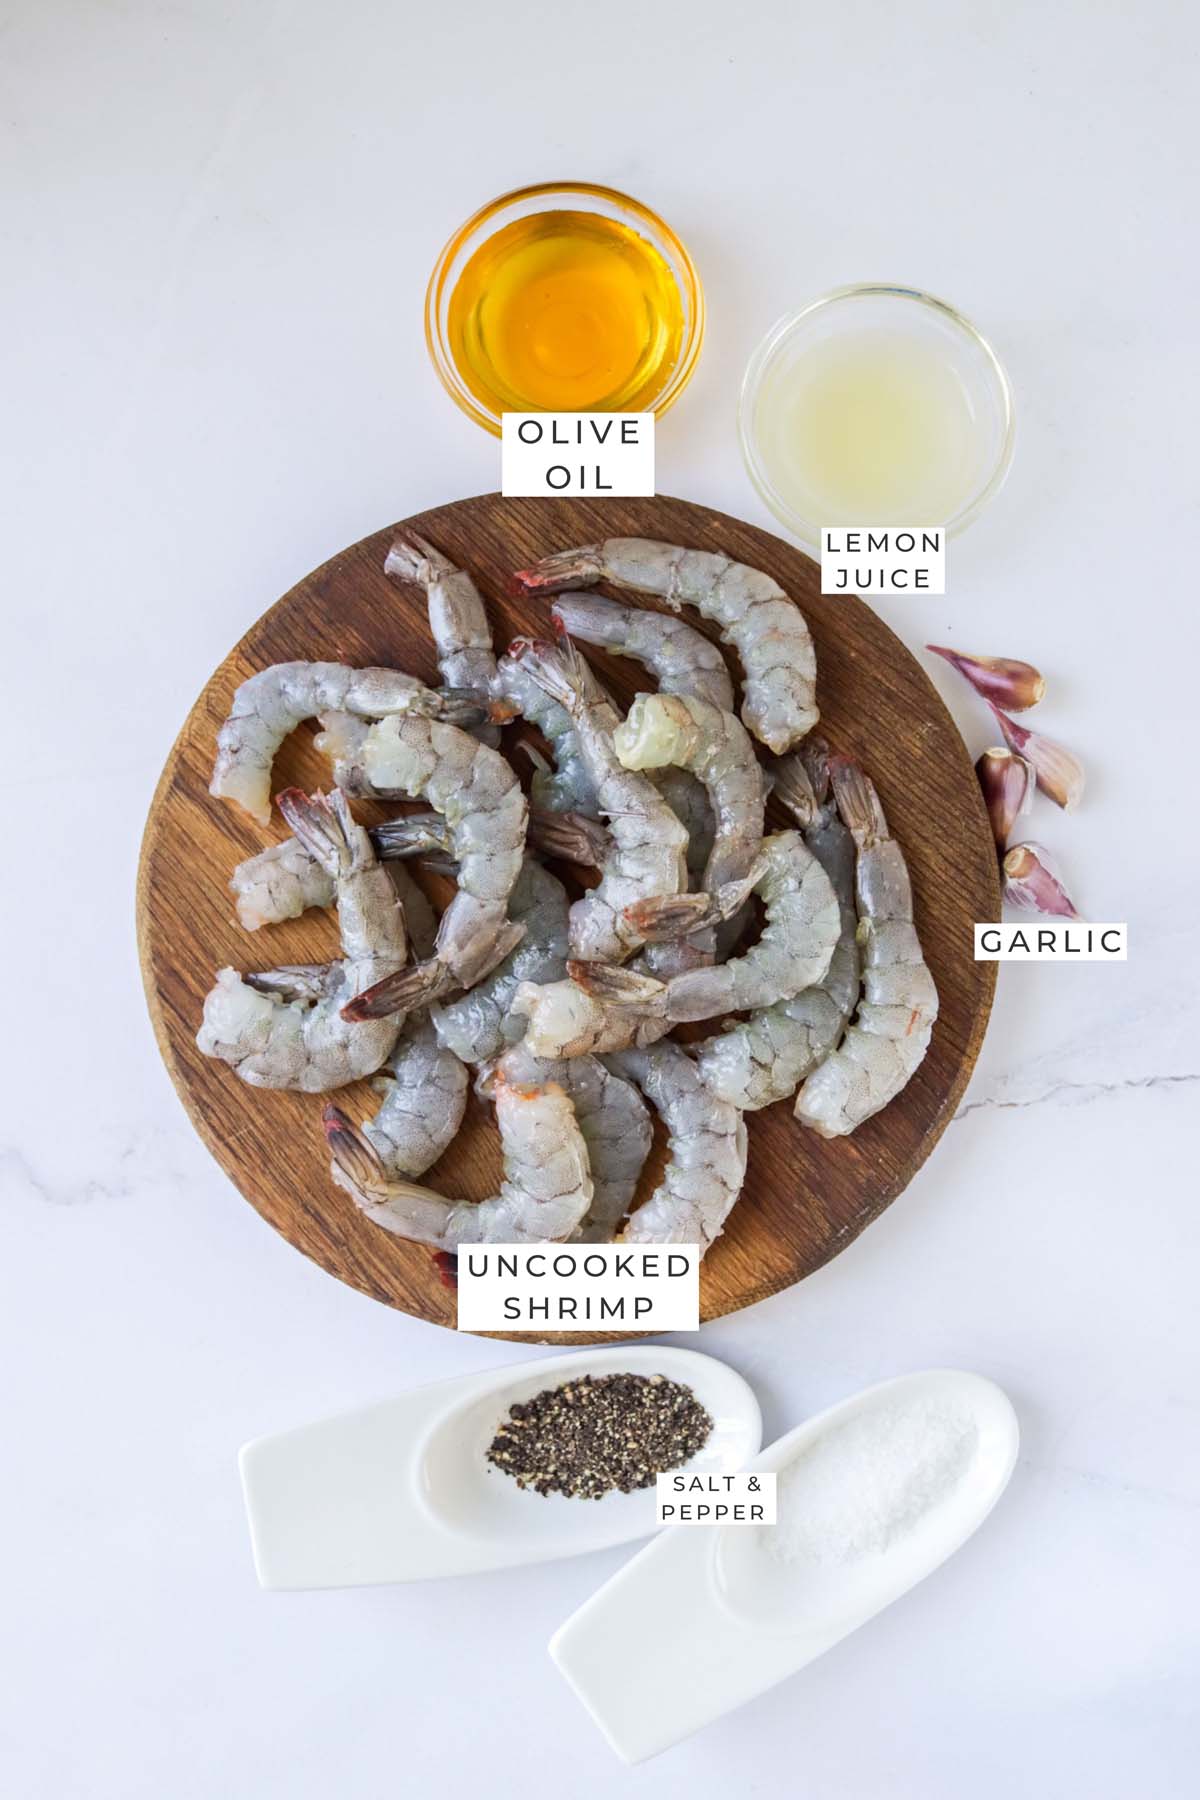 Labeled ingredients for the seared shrimp.